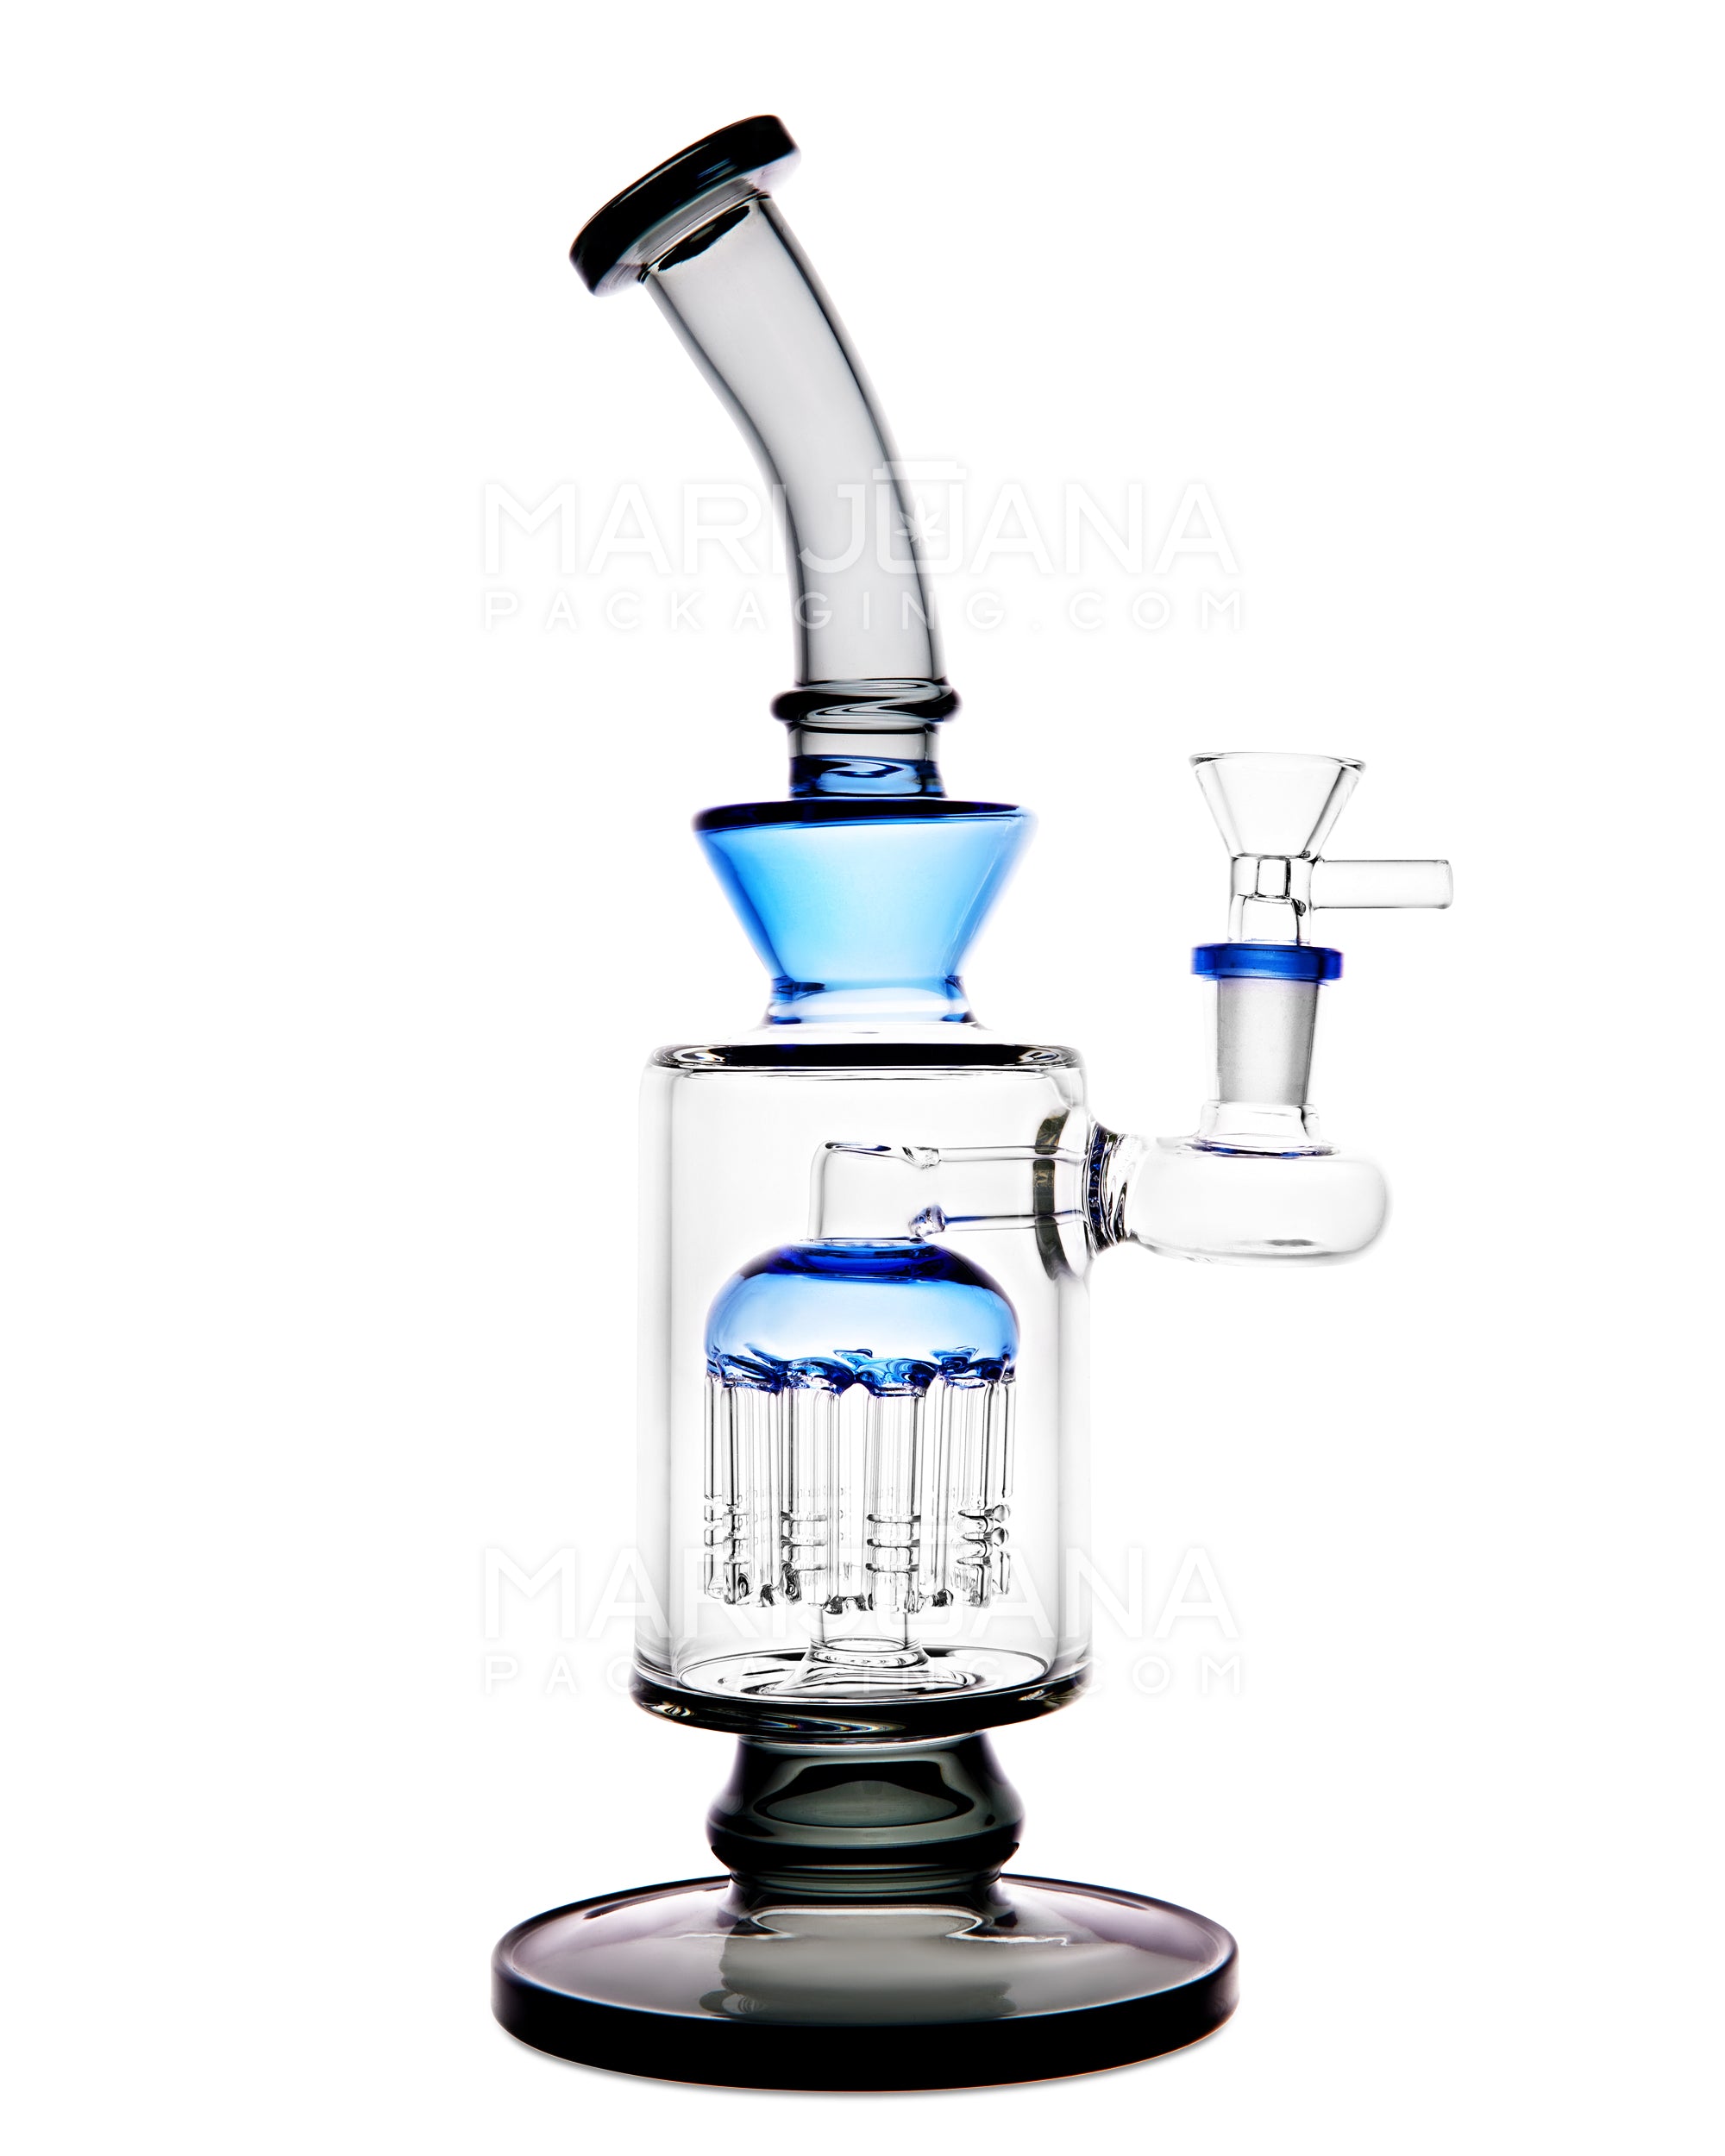 Bent Neck Tree Perc Color Trim Glass Water Pipe w/ Thick Base | 10.5in Tall - 14mm Bowl - Black - 1